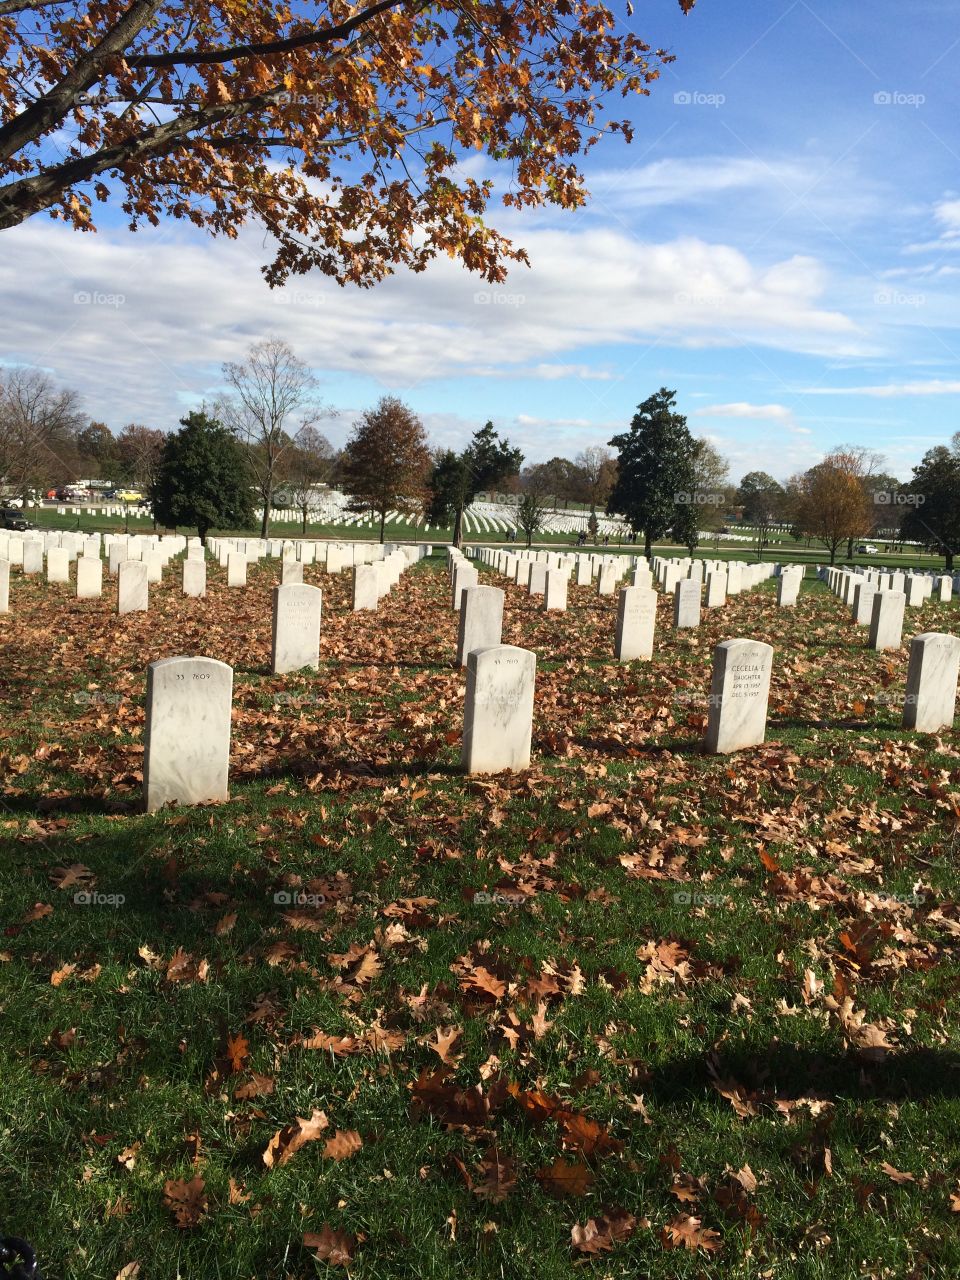 Arlington National Cemetery in the fall weather.